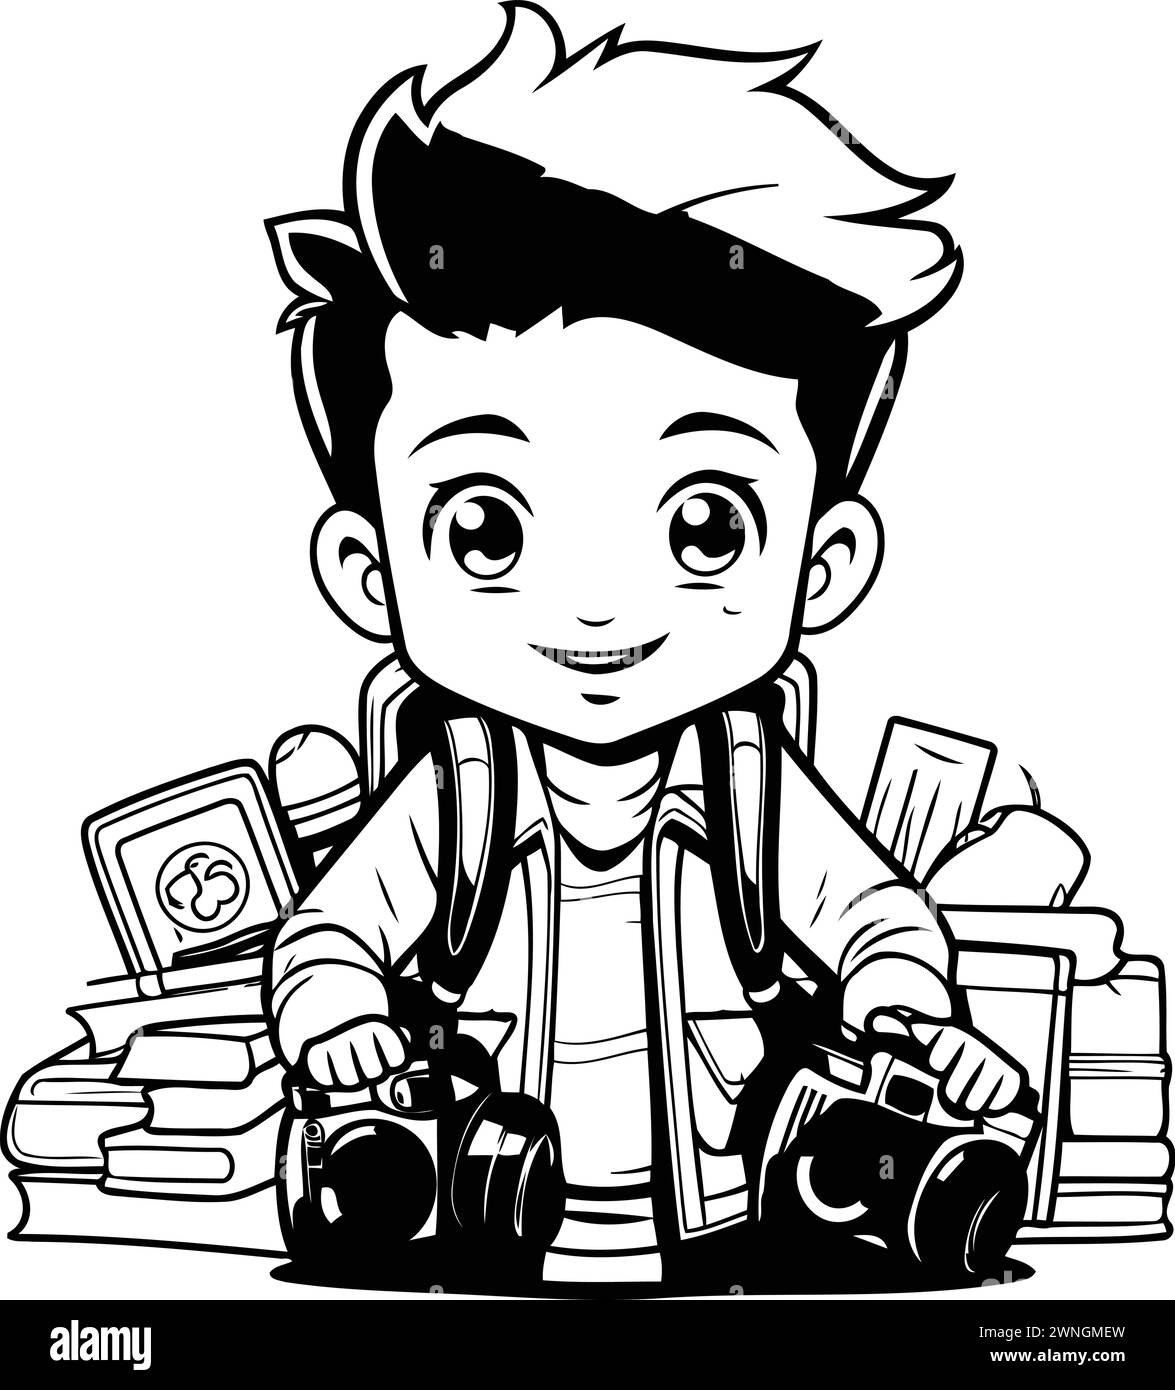 Boy with camera and books - Black and White Cartoon Illustration. Vector Stock Vector